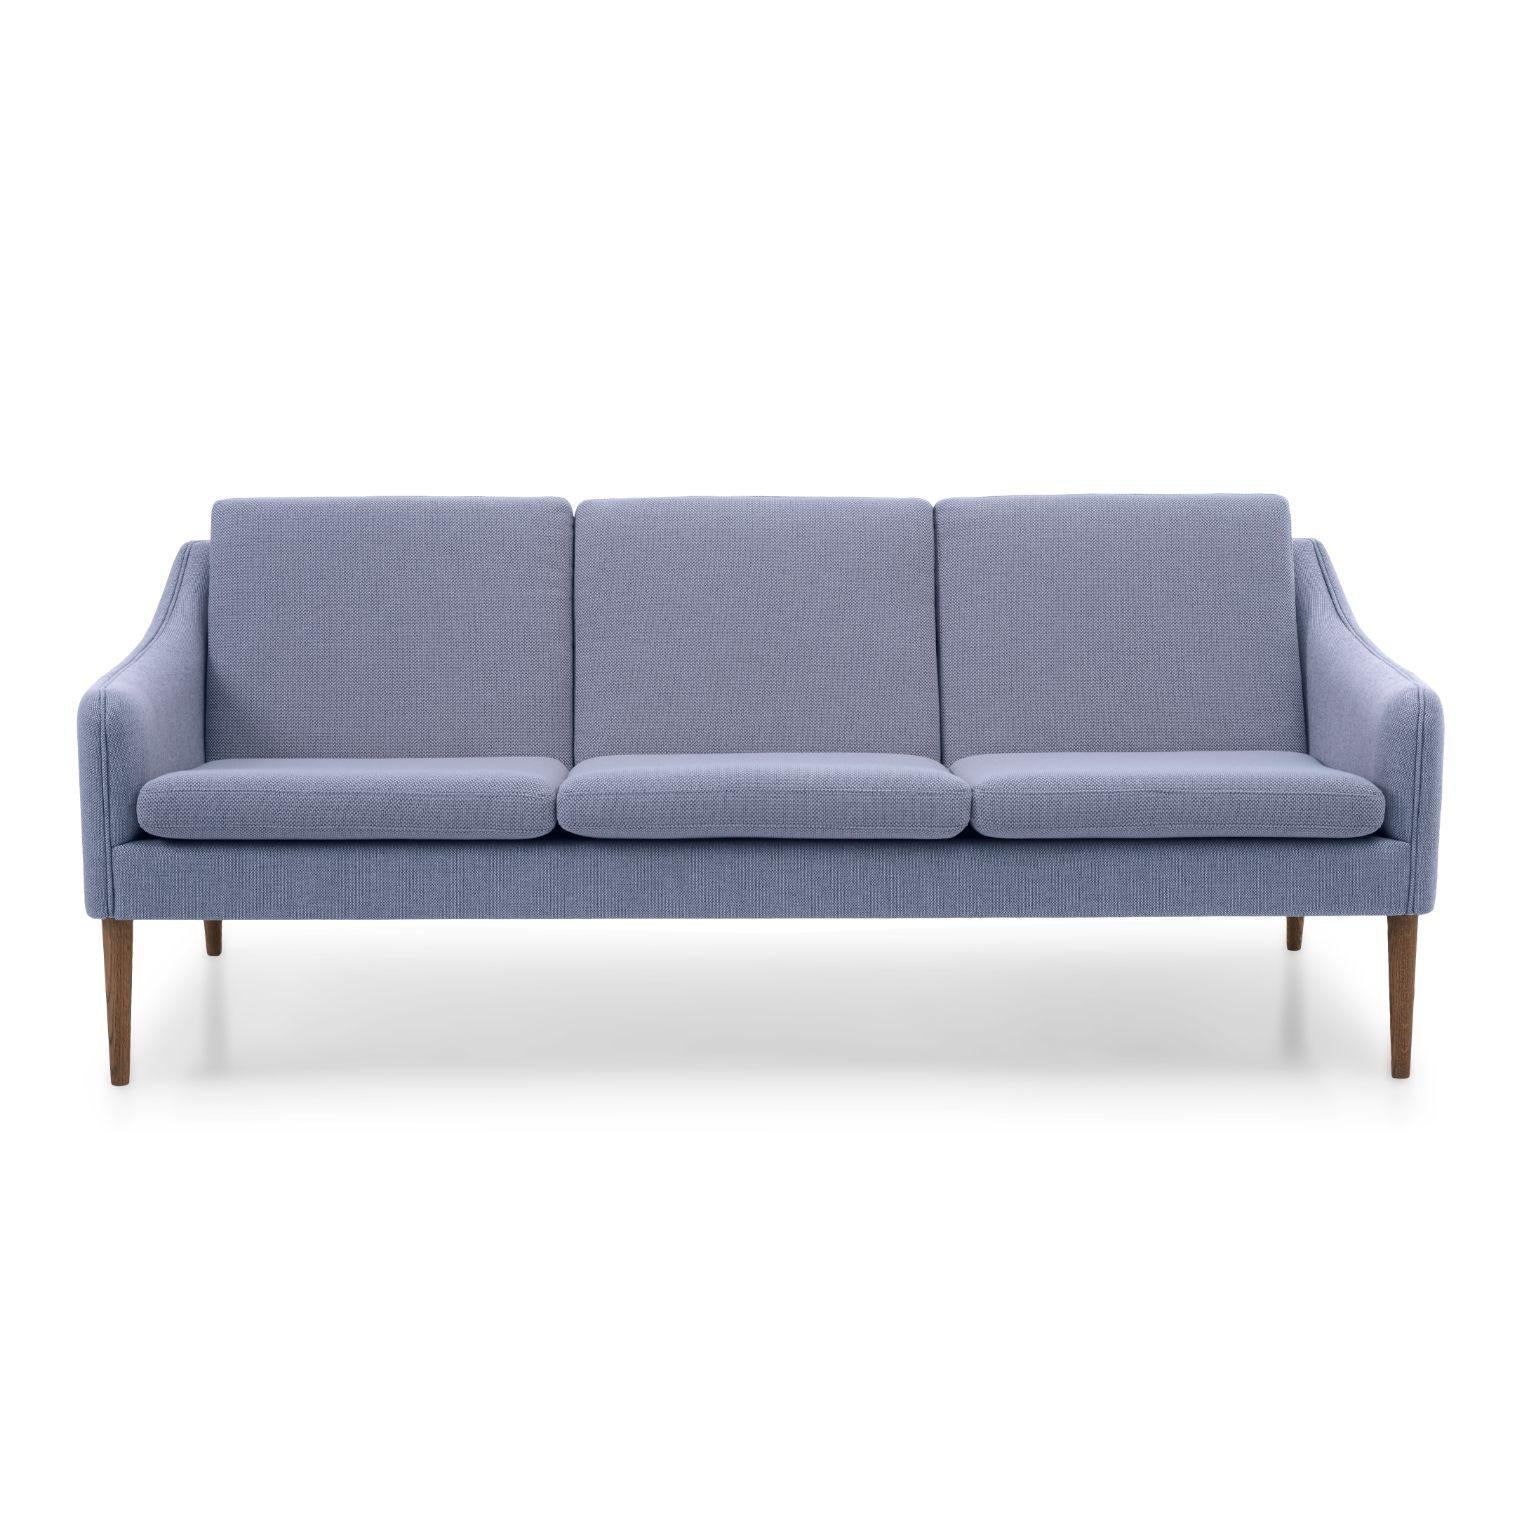 Mr Olsen 3 seater oak soft violet by Warm Nordic
Dimensions: D201 x W79 x H 78/46 cm
Material: Textile upholstery, Foam, Spring system, Solid oiled oak legs, Solid smoked oak legs
Weight: 50 kg
Also available in different colours and finishes.